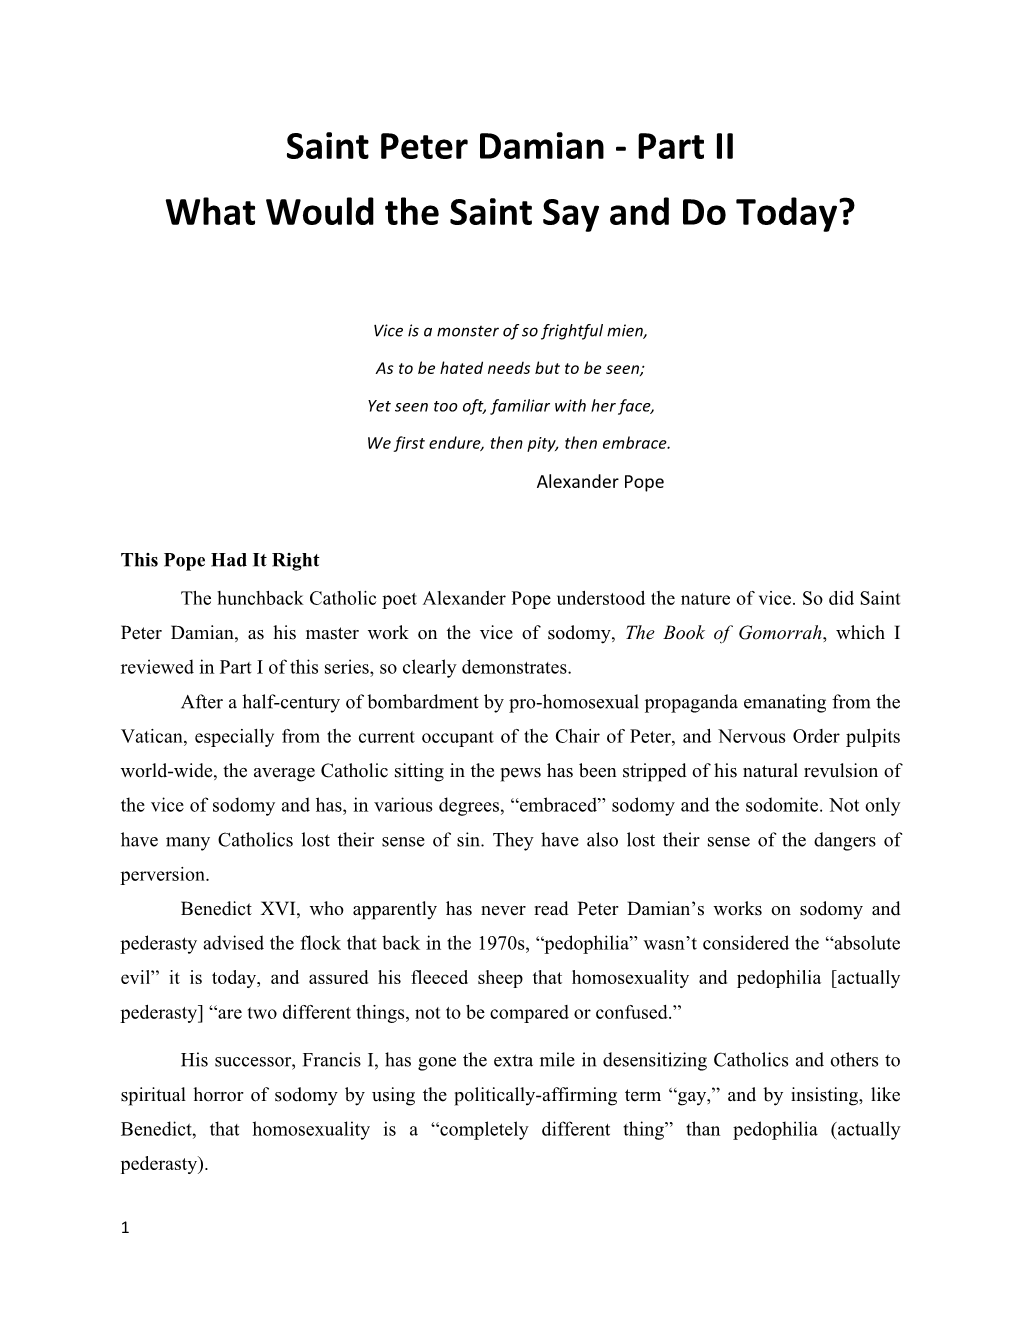 Saint Peter Damian - Part II What Would the Saint Say and Do Today?